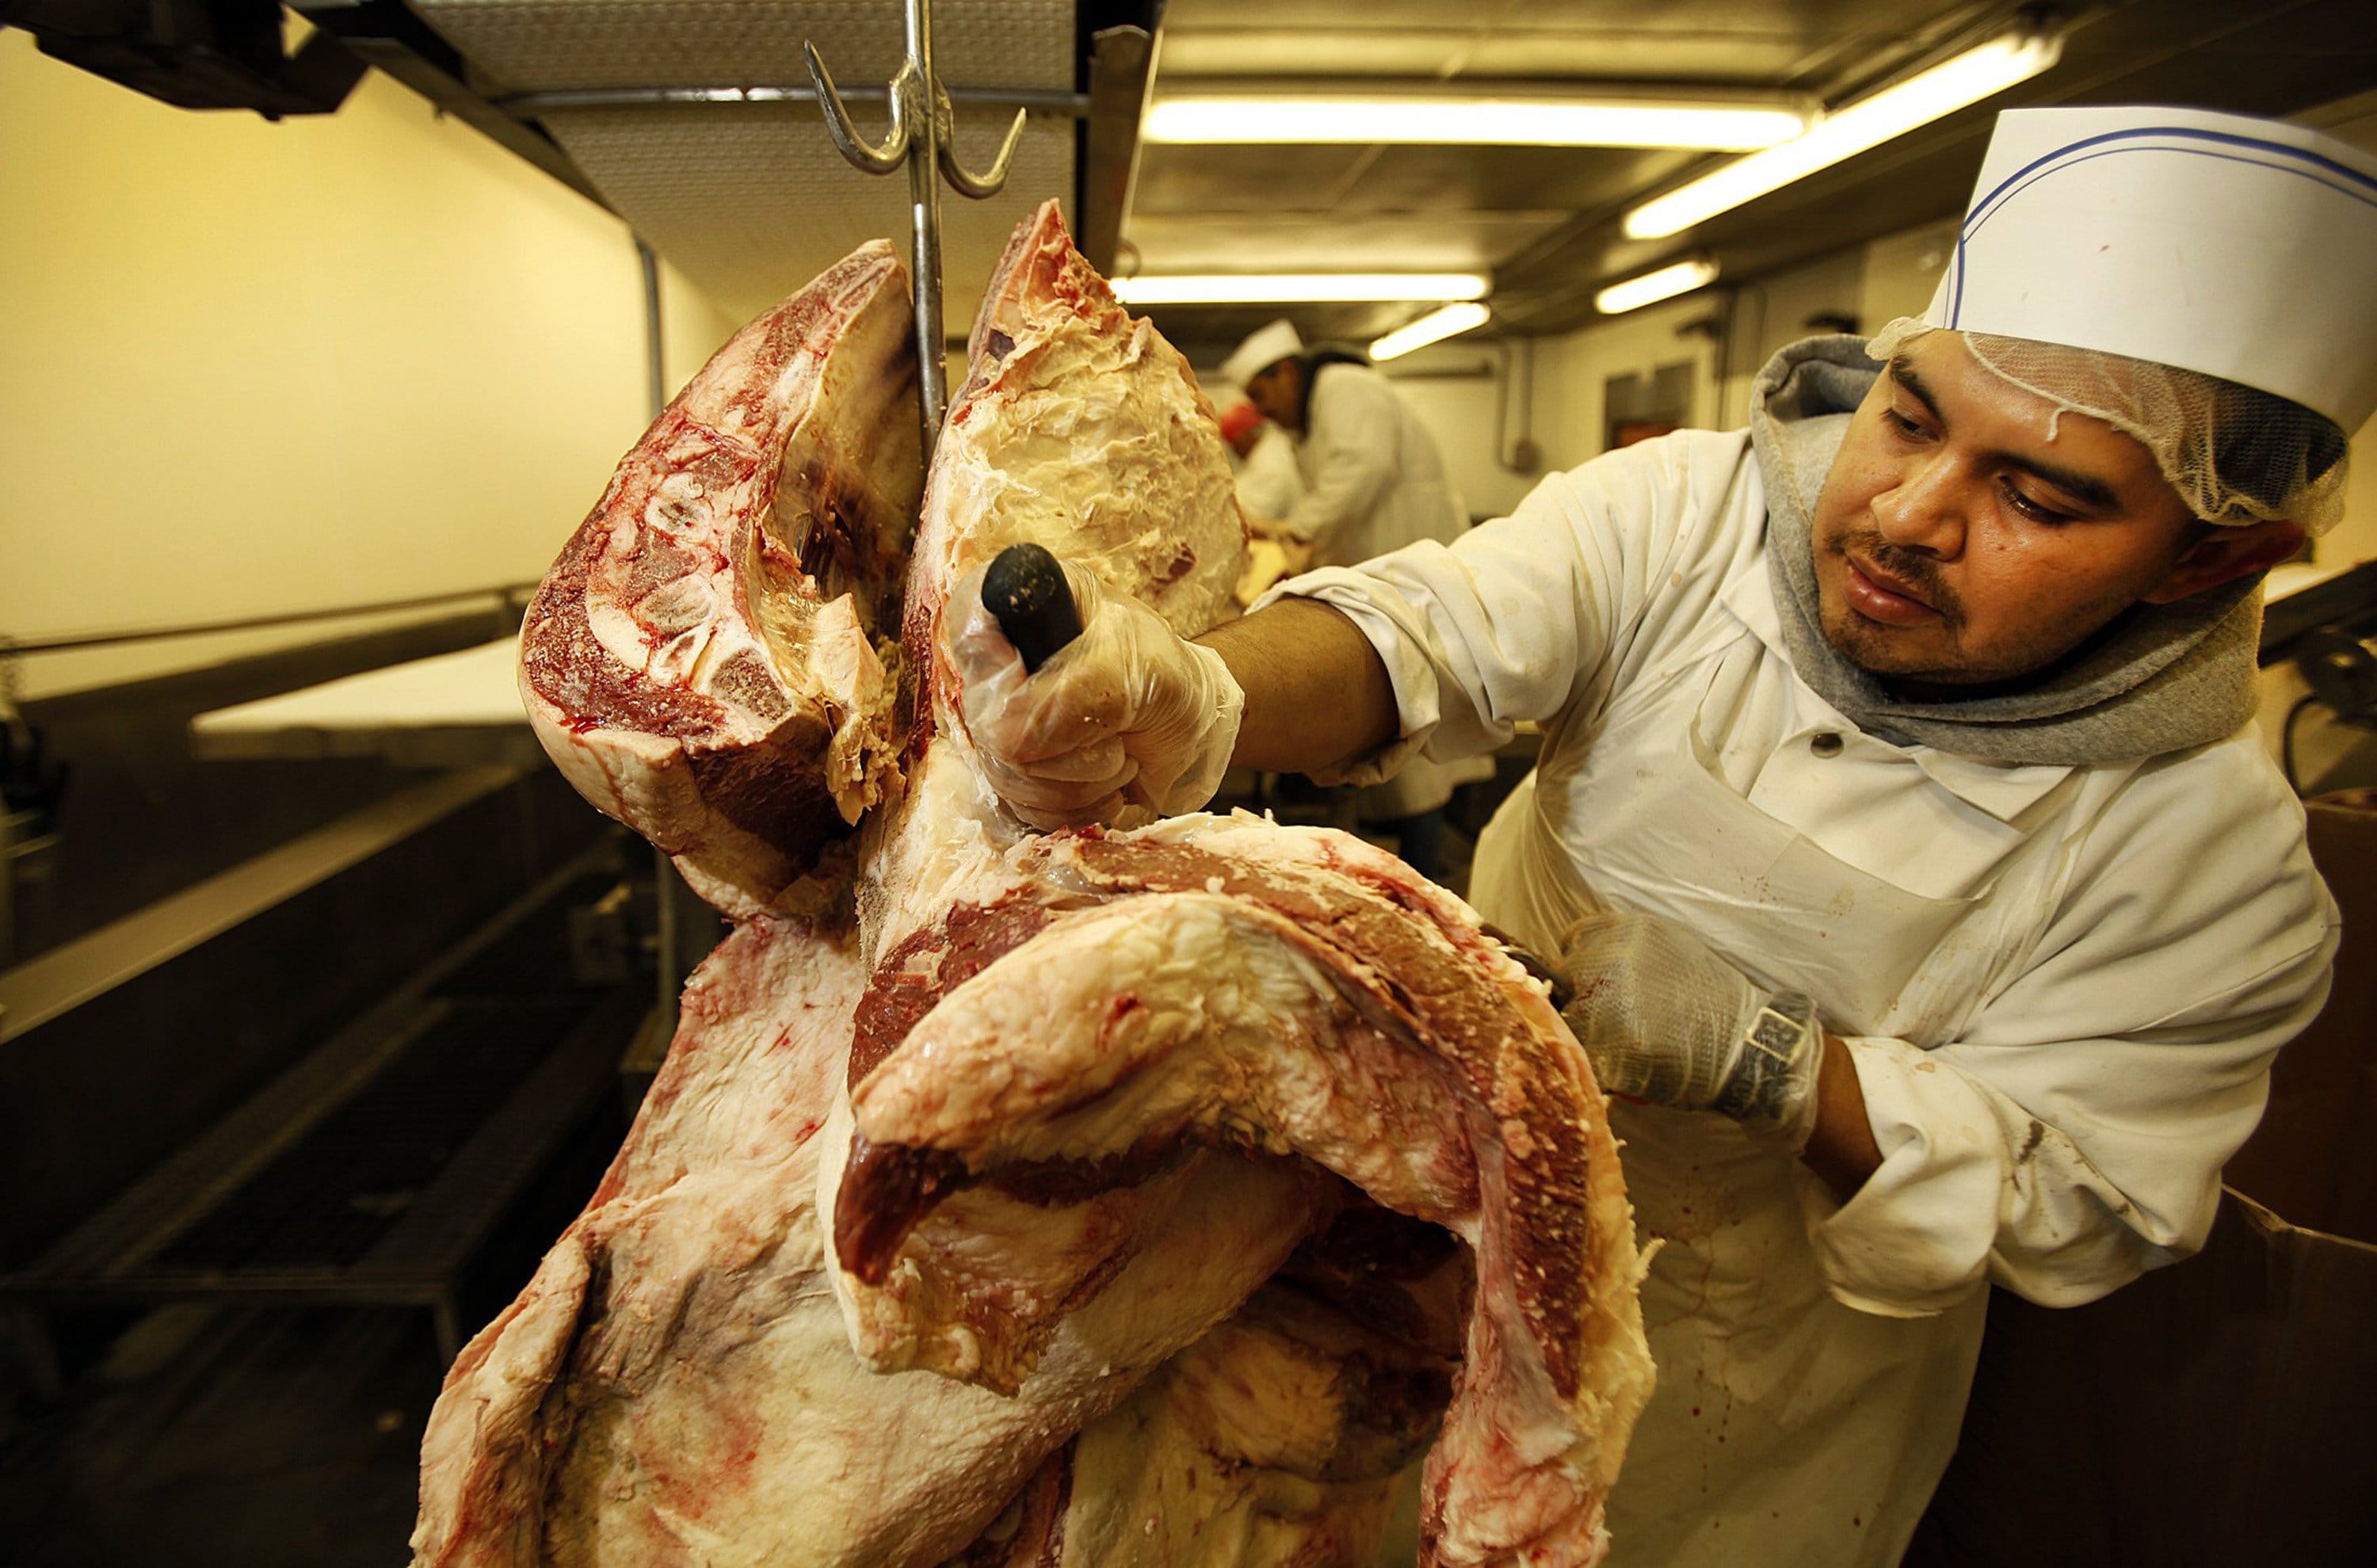 Juan Hernandez is cutting beef brisket at R.C. Provisions in Burbank, Calif., on March 28 as beef prices are at record highs because of thinning cattle herds decimated by drought.